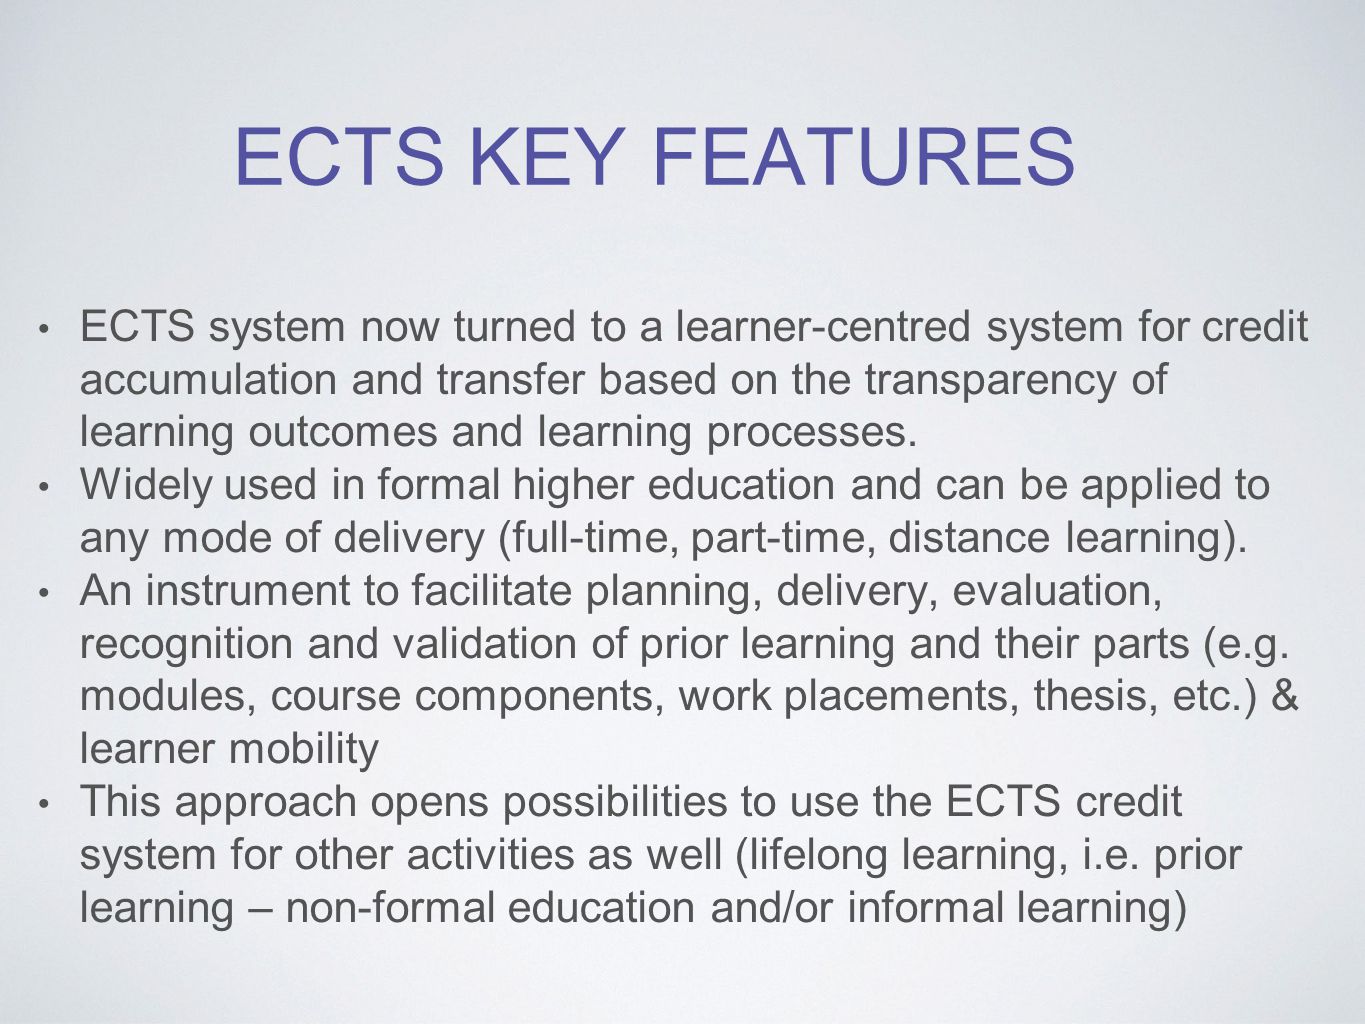 ECTS KEY FEATURES ECTS system now turned to a learner-centred system for credit accumulation and transfer based on the transparency of learning outcomes and learning processes.